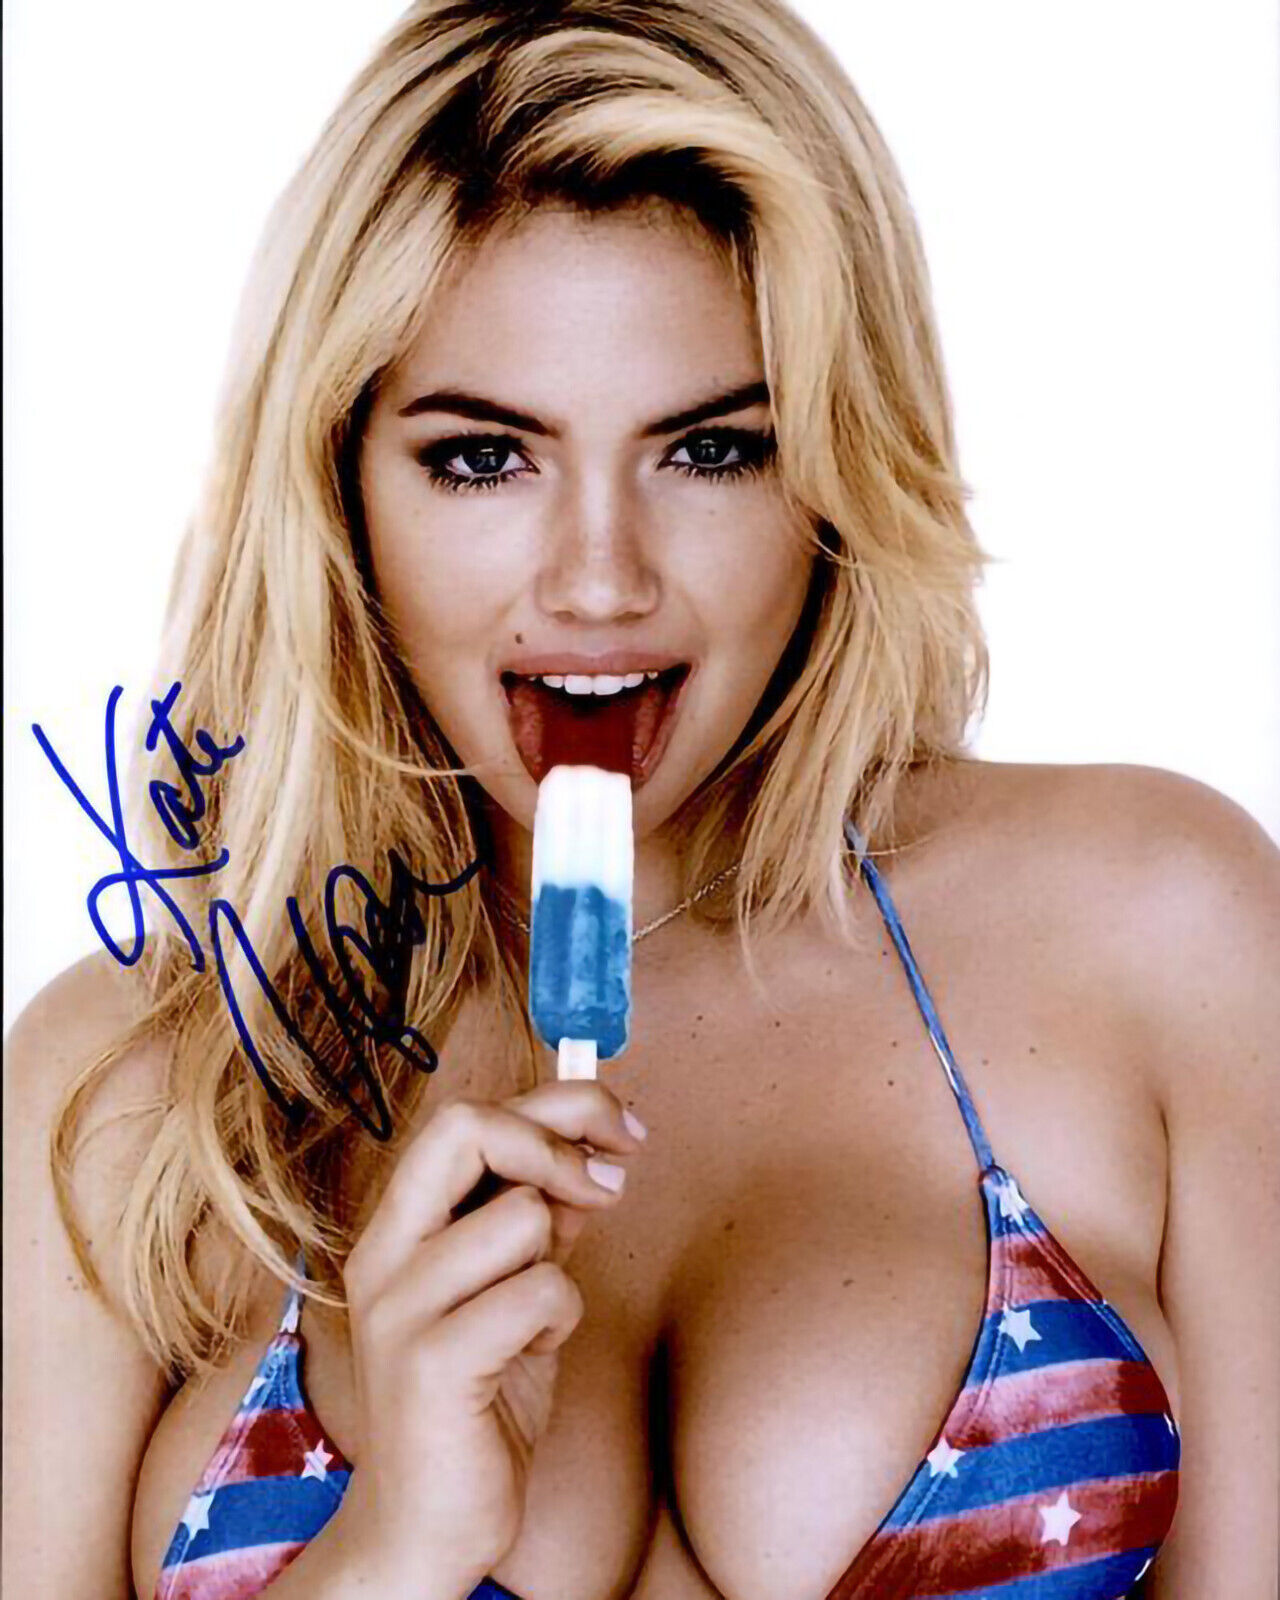 Kate Upton Autographed Signed Photo 8x10 Reprint